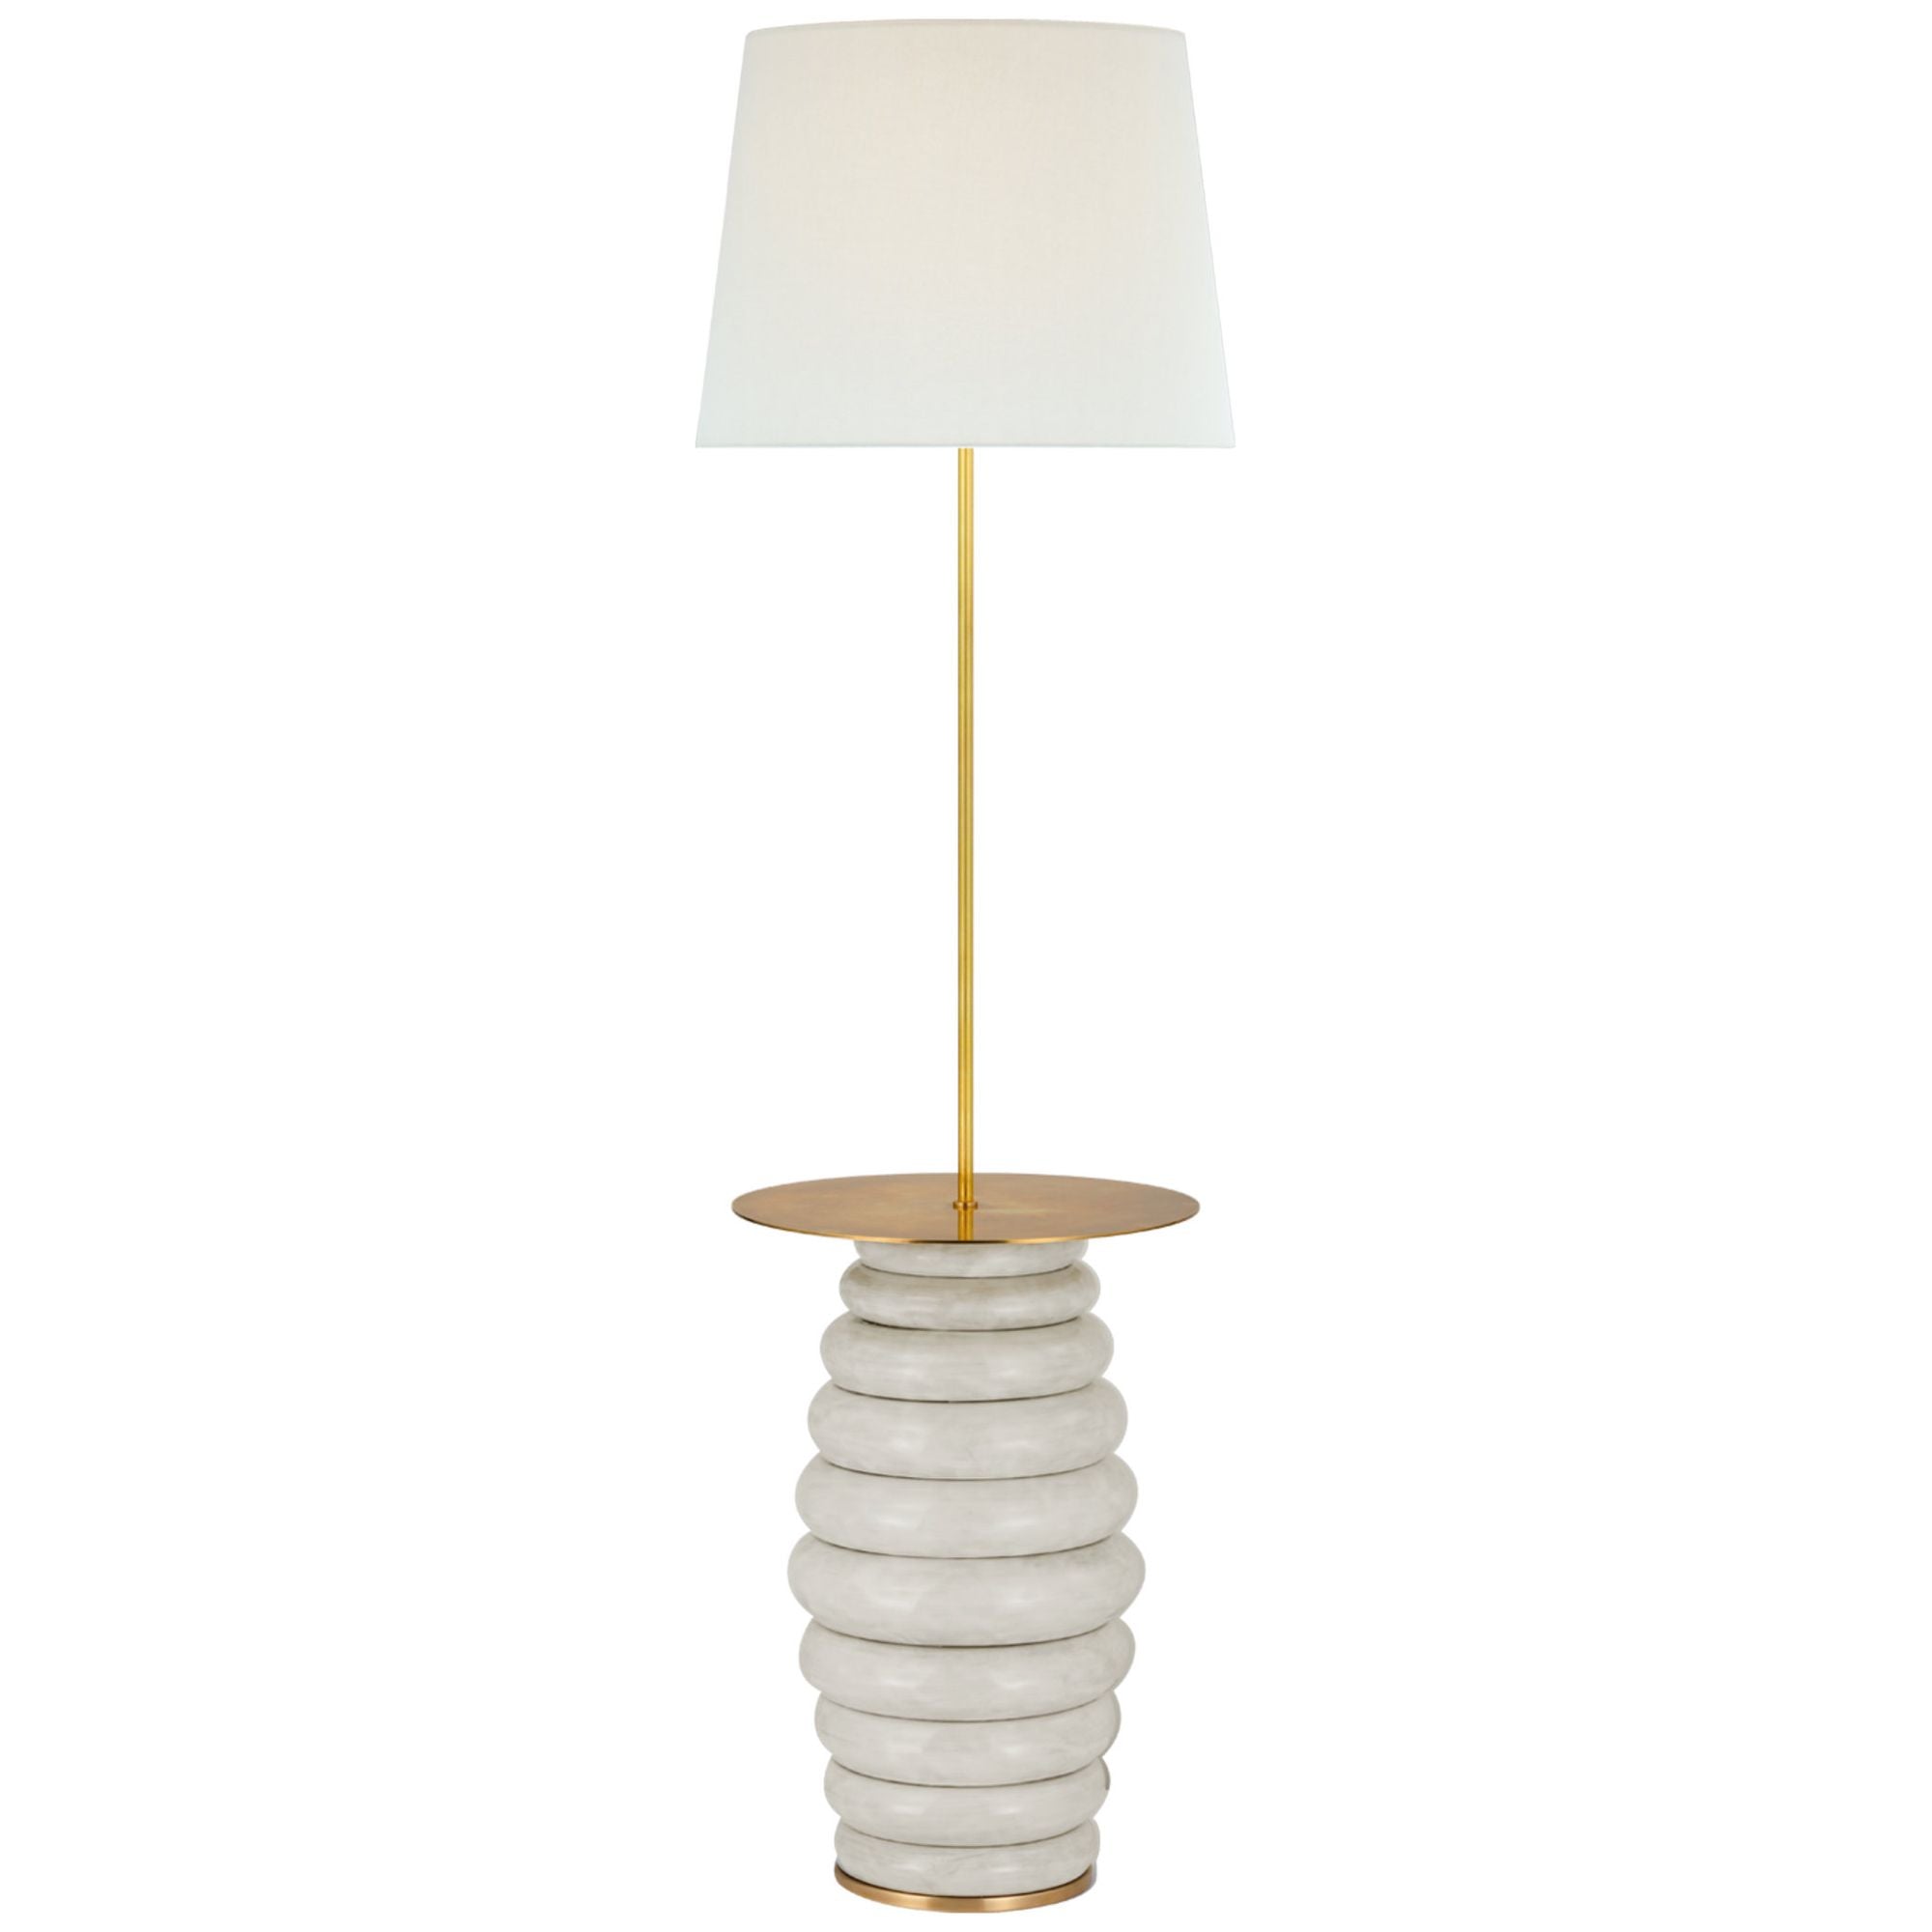 Kelly Wearstler Phoebe Extra Large Tray Table Floor Lamp in Antiqued White with Linen Shade